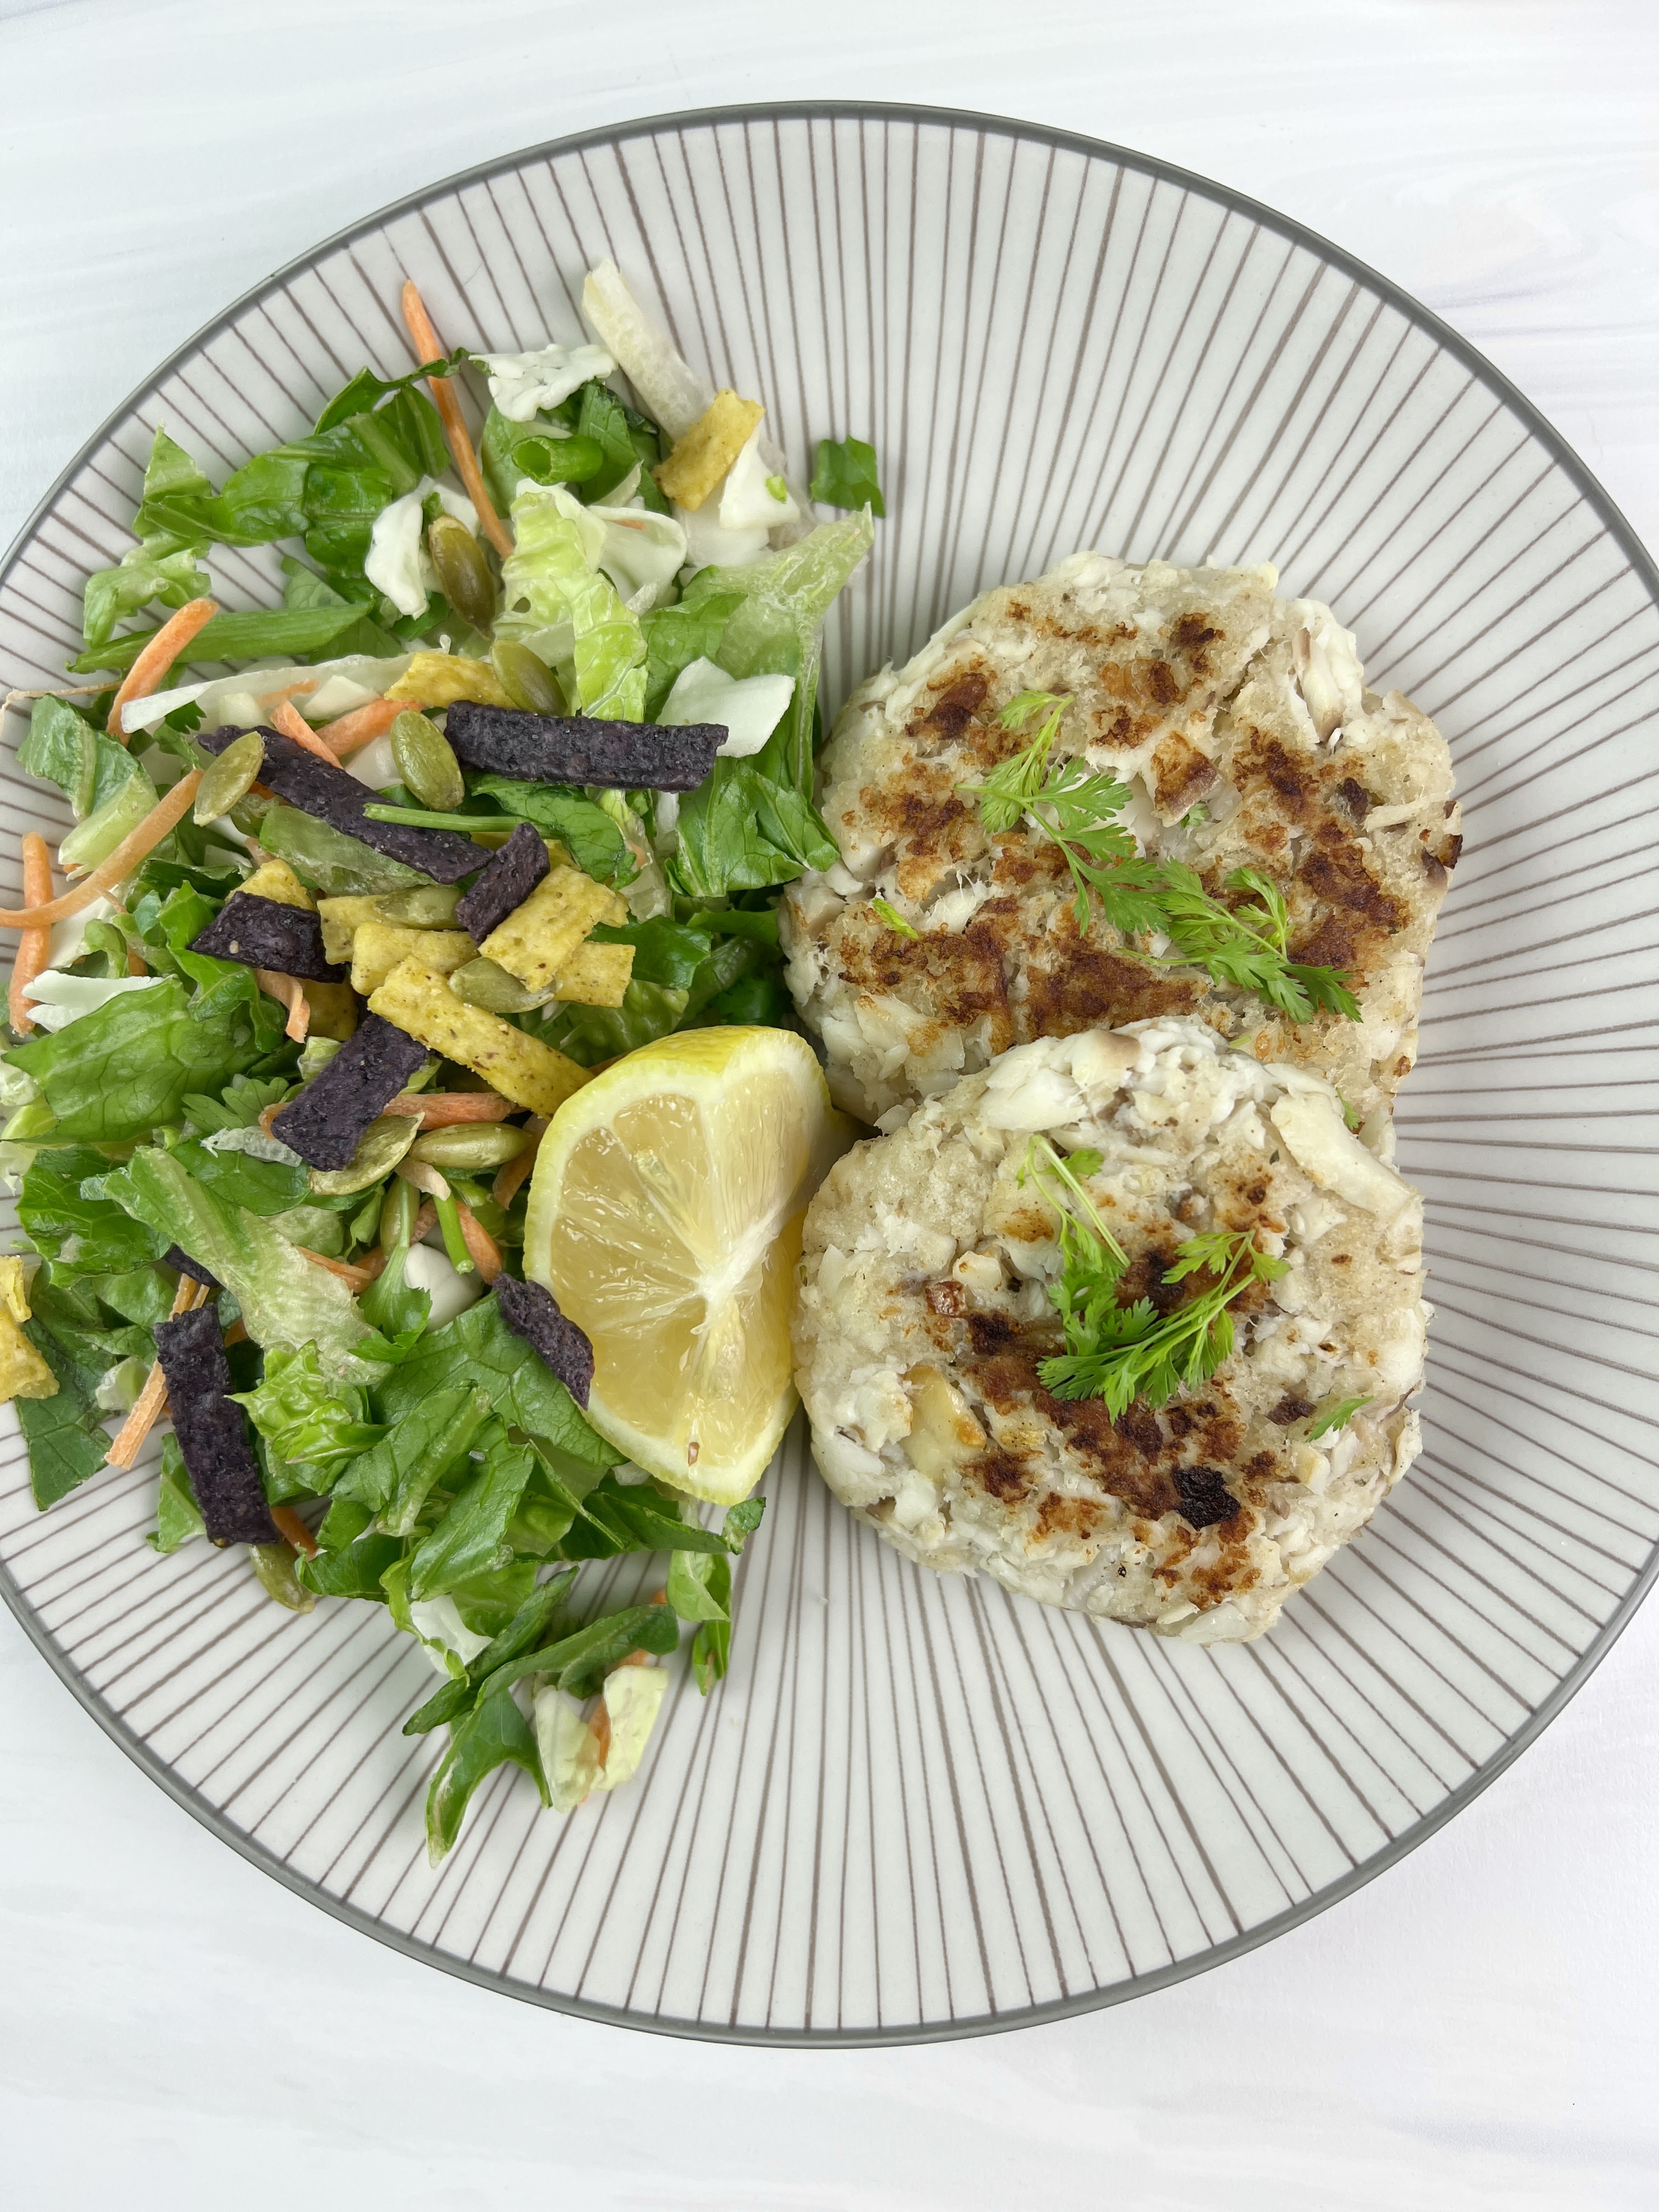 Easy and delicious homemade fish cakes can be a fun appetizer or main course made with tilapia or your favorite white fish. 